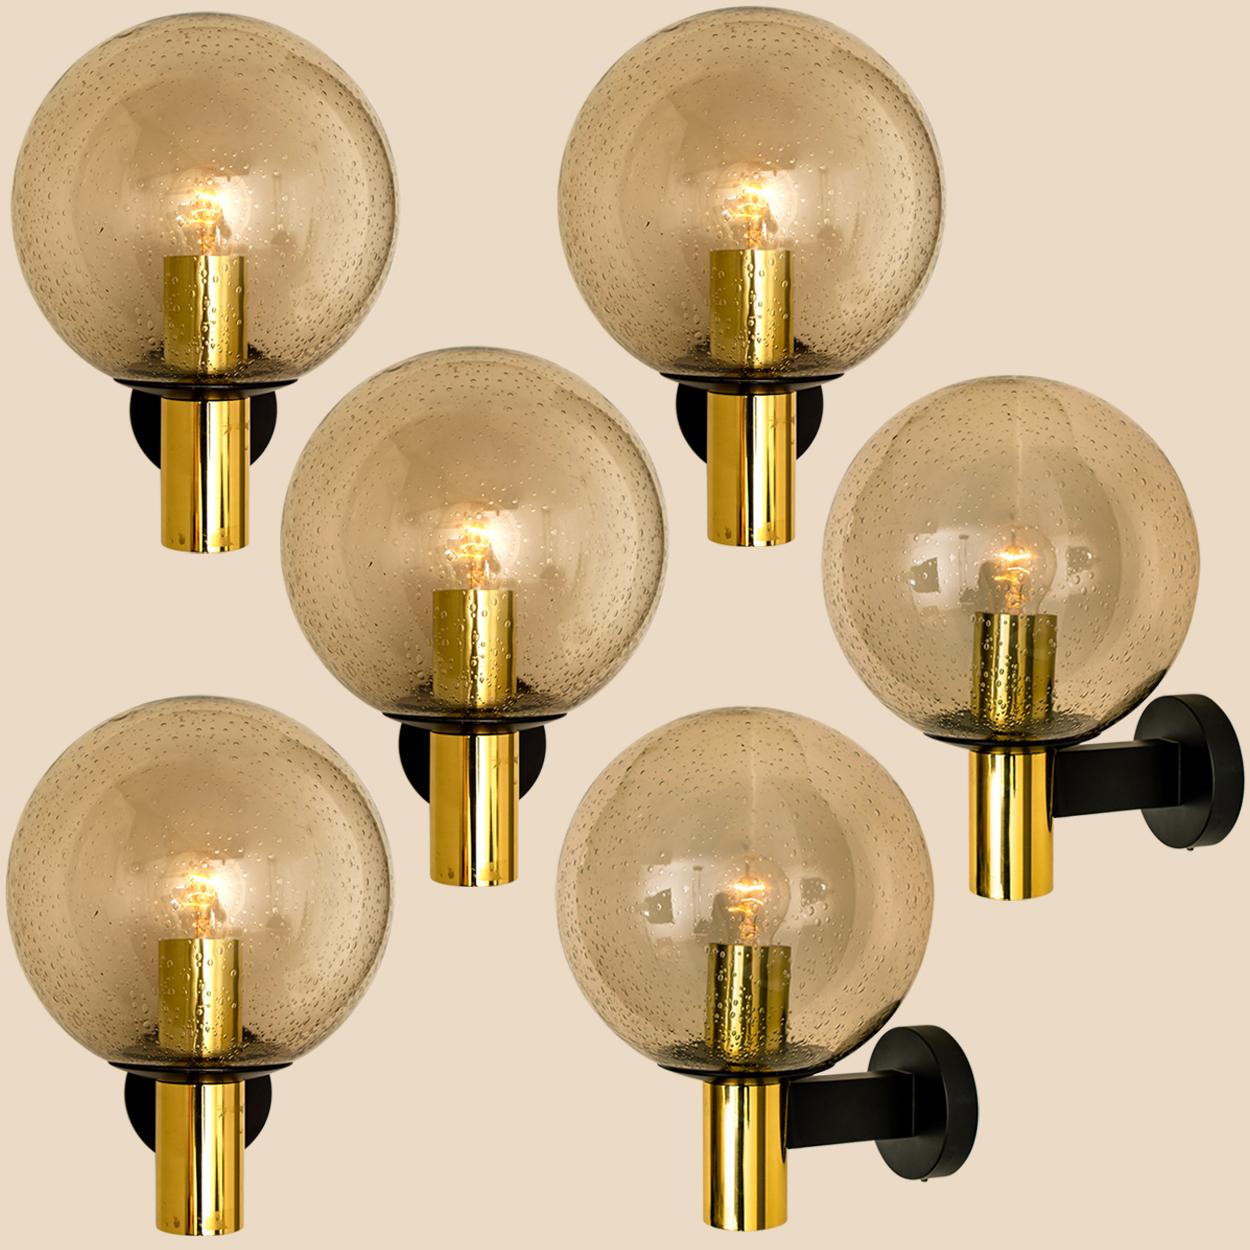 1 of the 3 Pair of Glass Brass Wall Lamps by Glashütte Limburg, 1975s For Sale 4